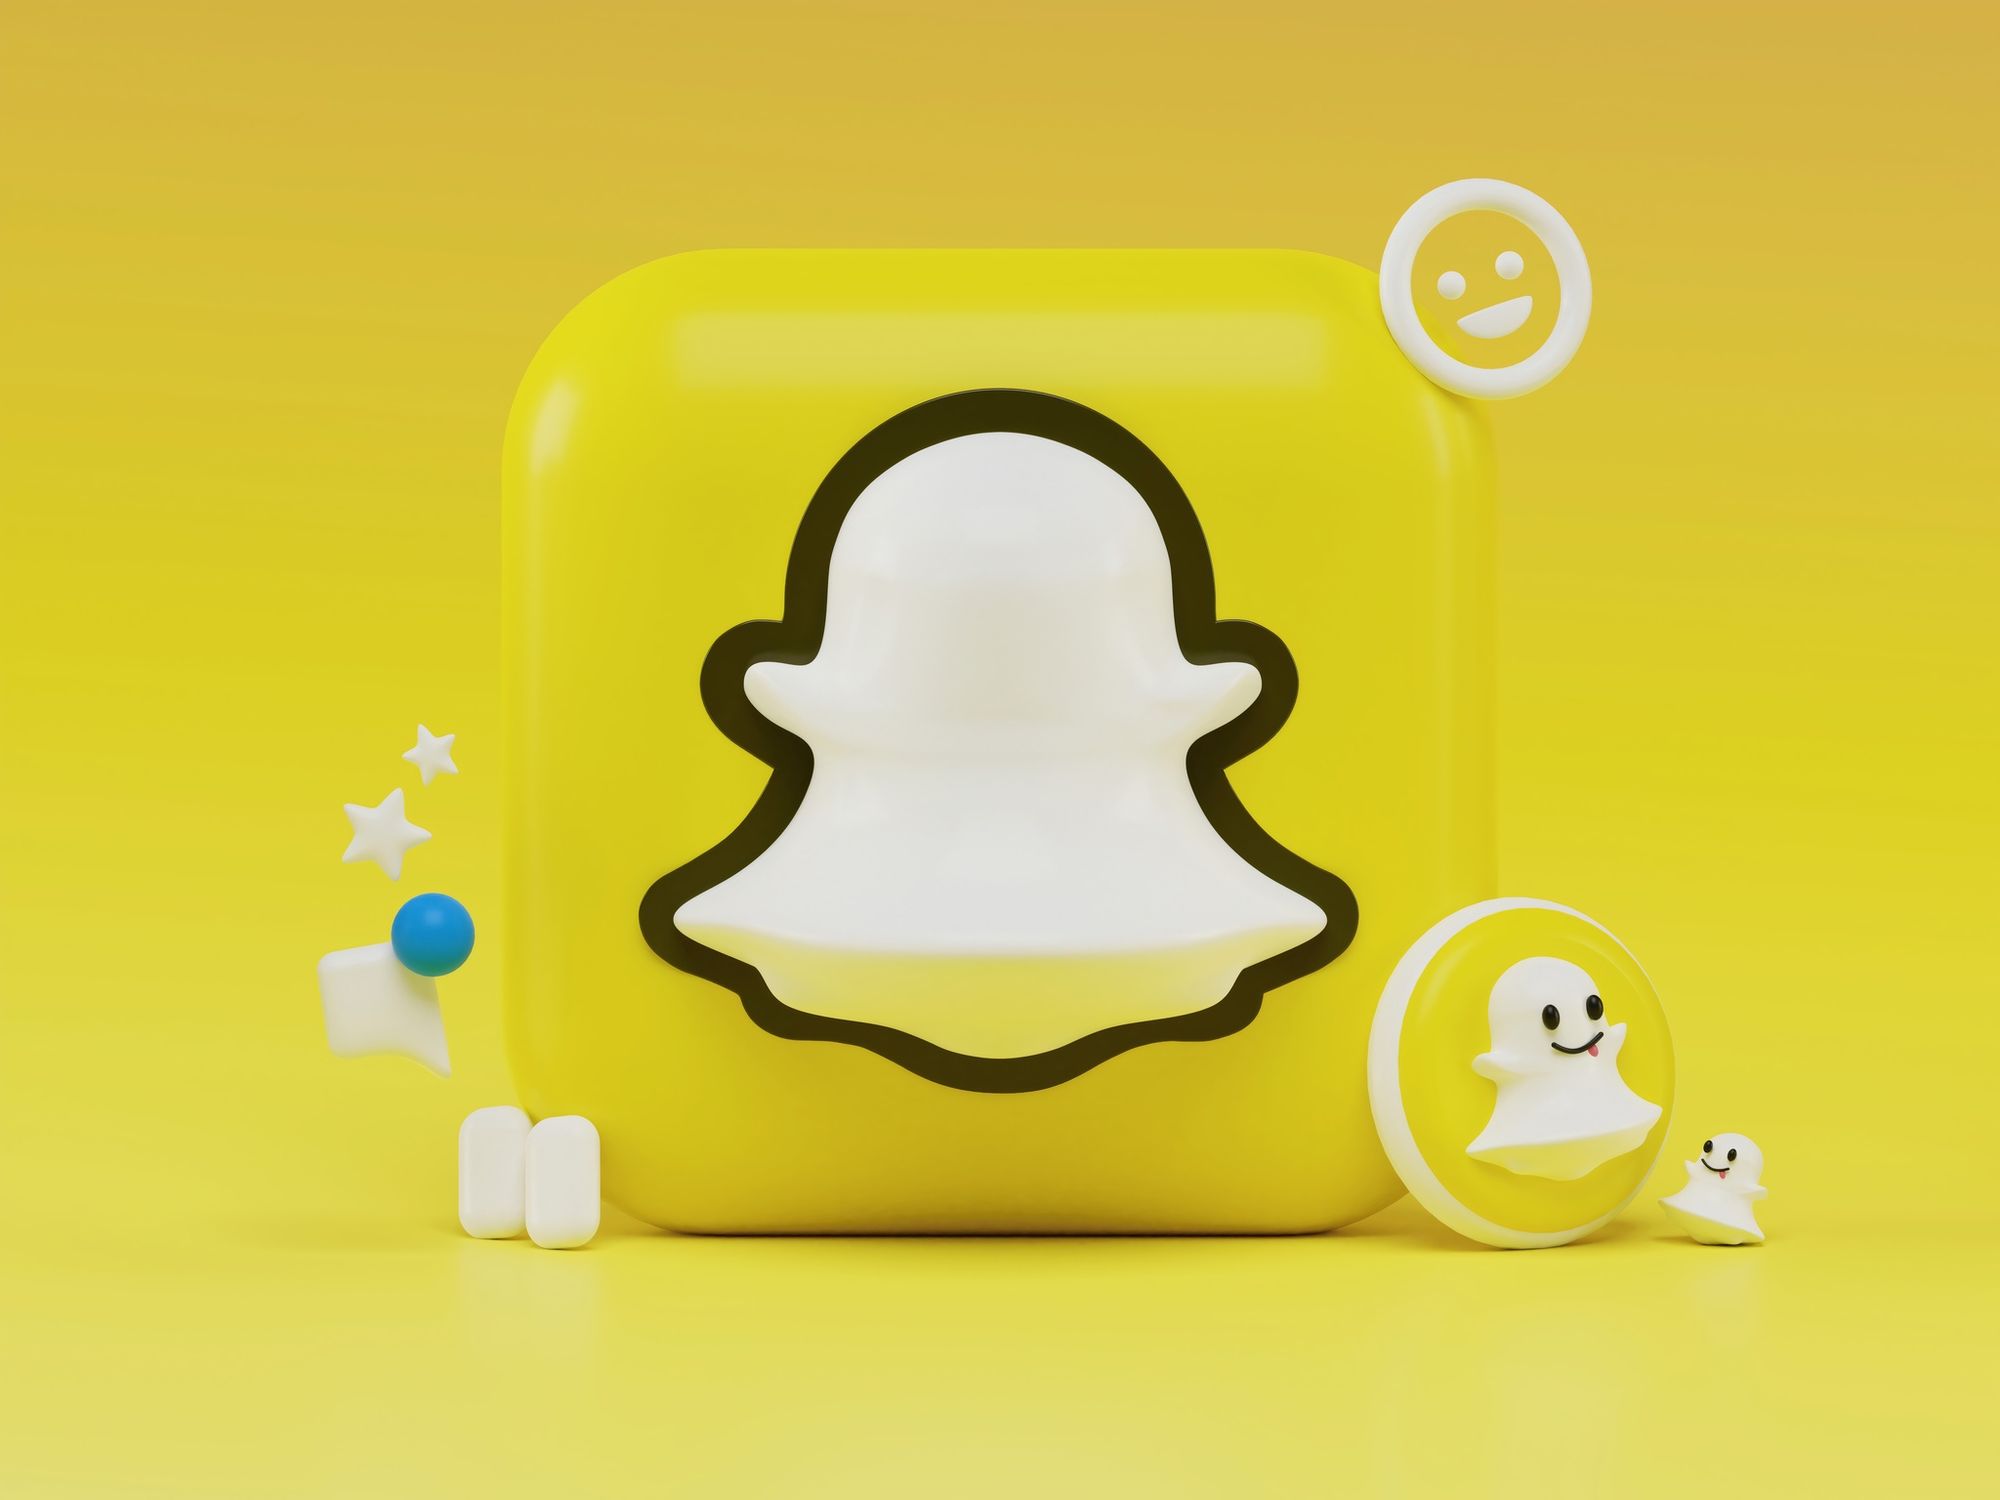 snapchat's logo in a 3d icon